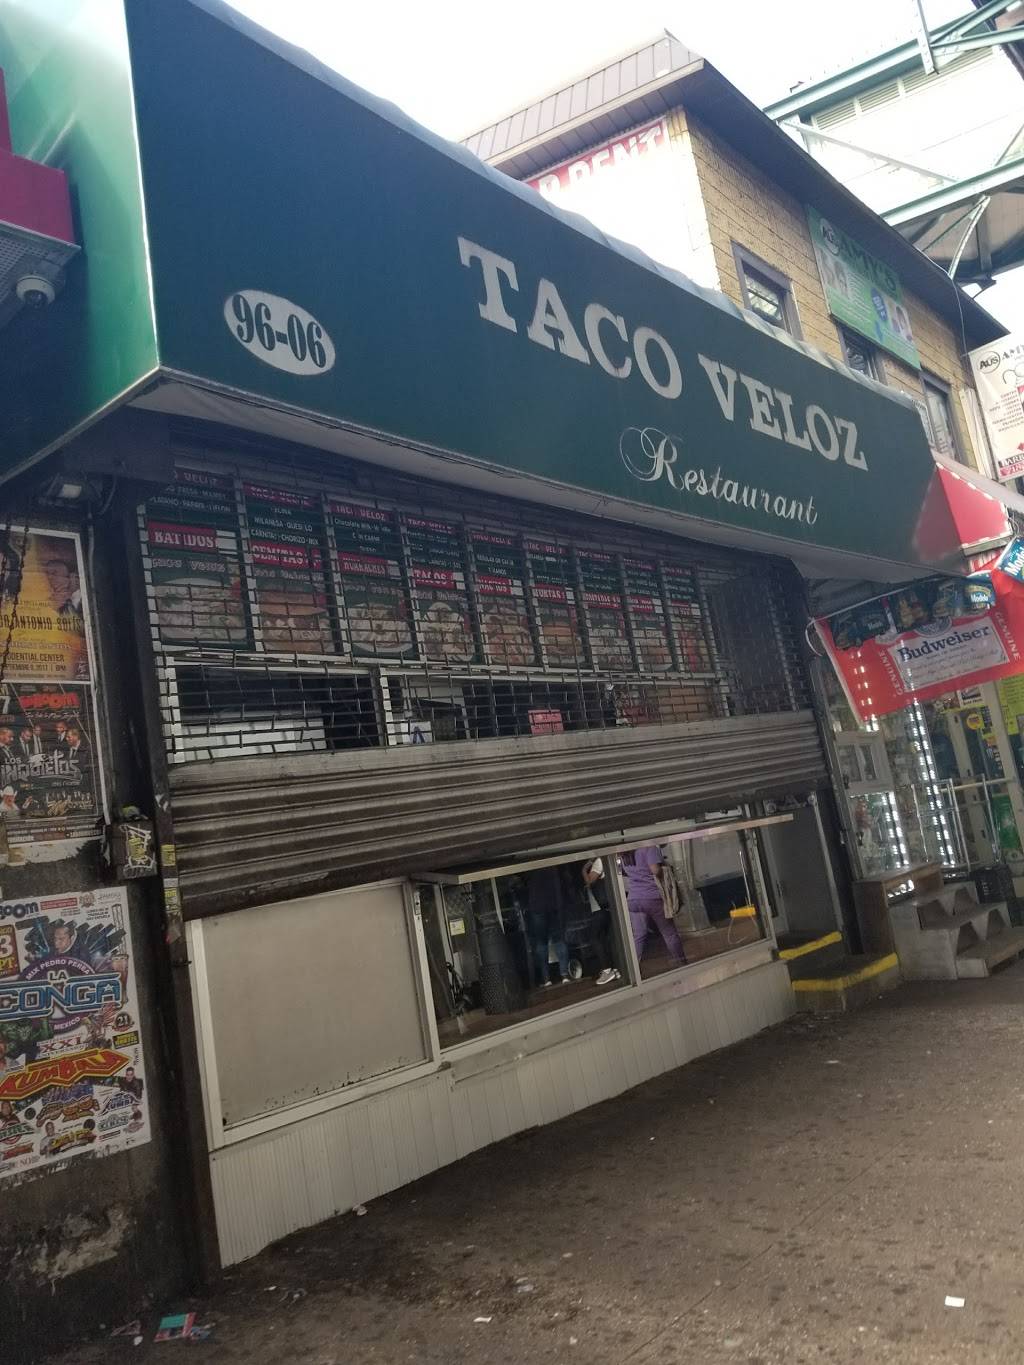 Taco Veloz | restaurant | 9606 Roosevelt Ave, Queens, NY 11368, USA | 7187795608 OR +1 718-779-5608